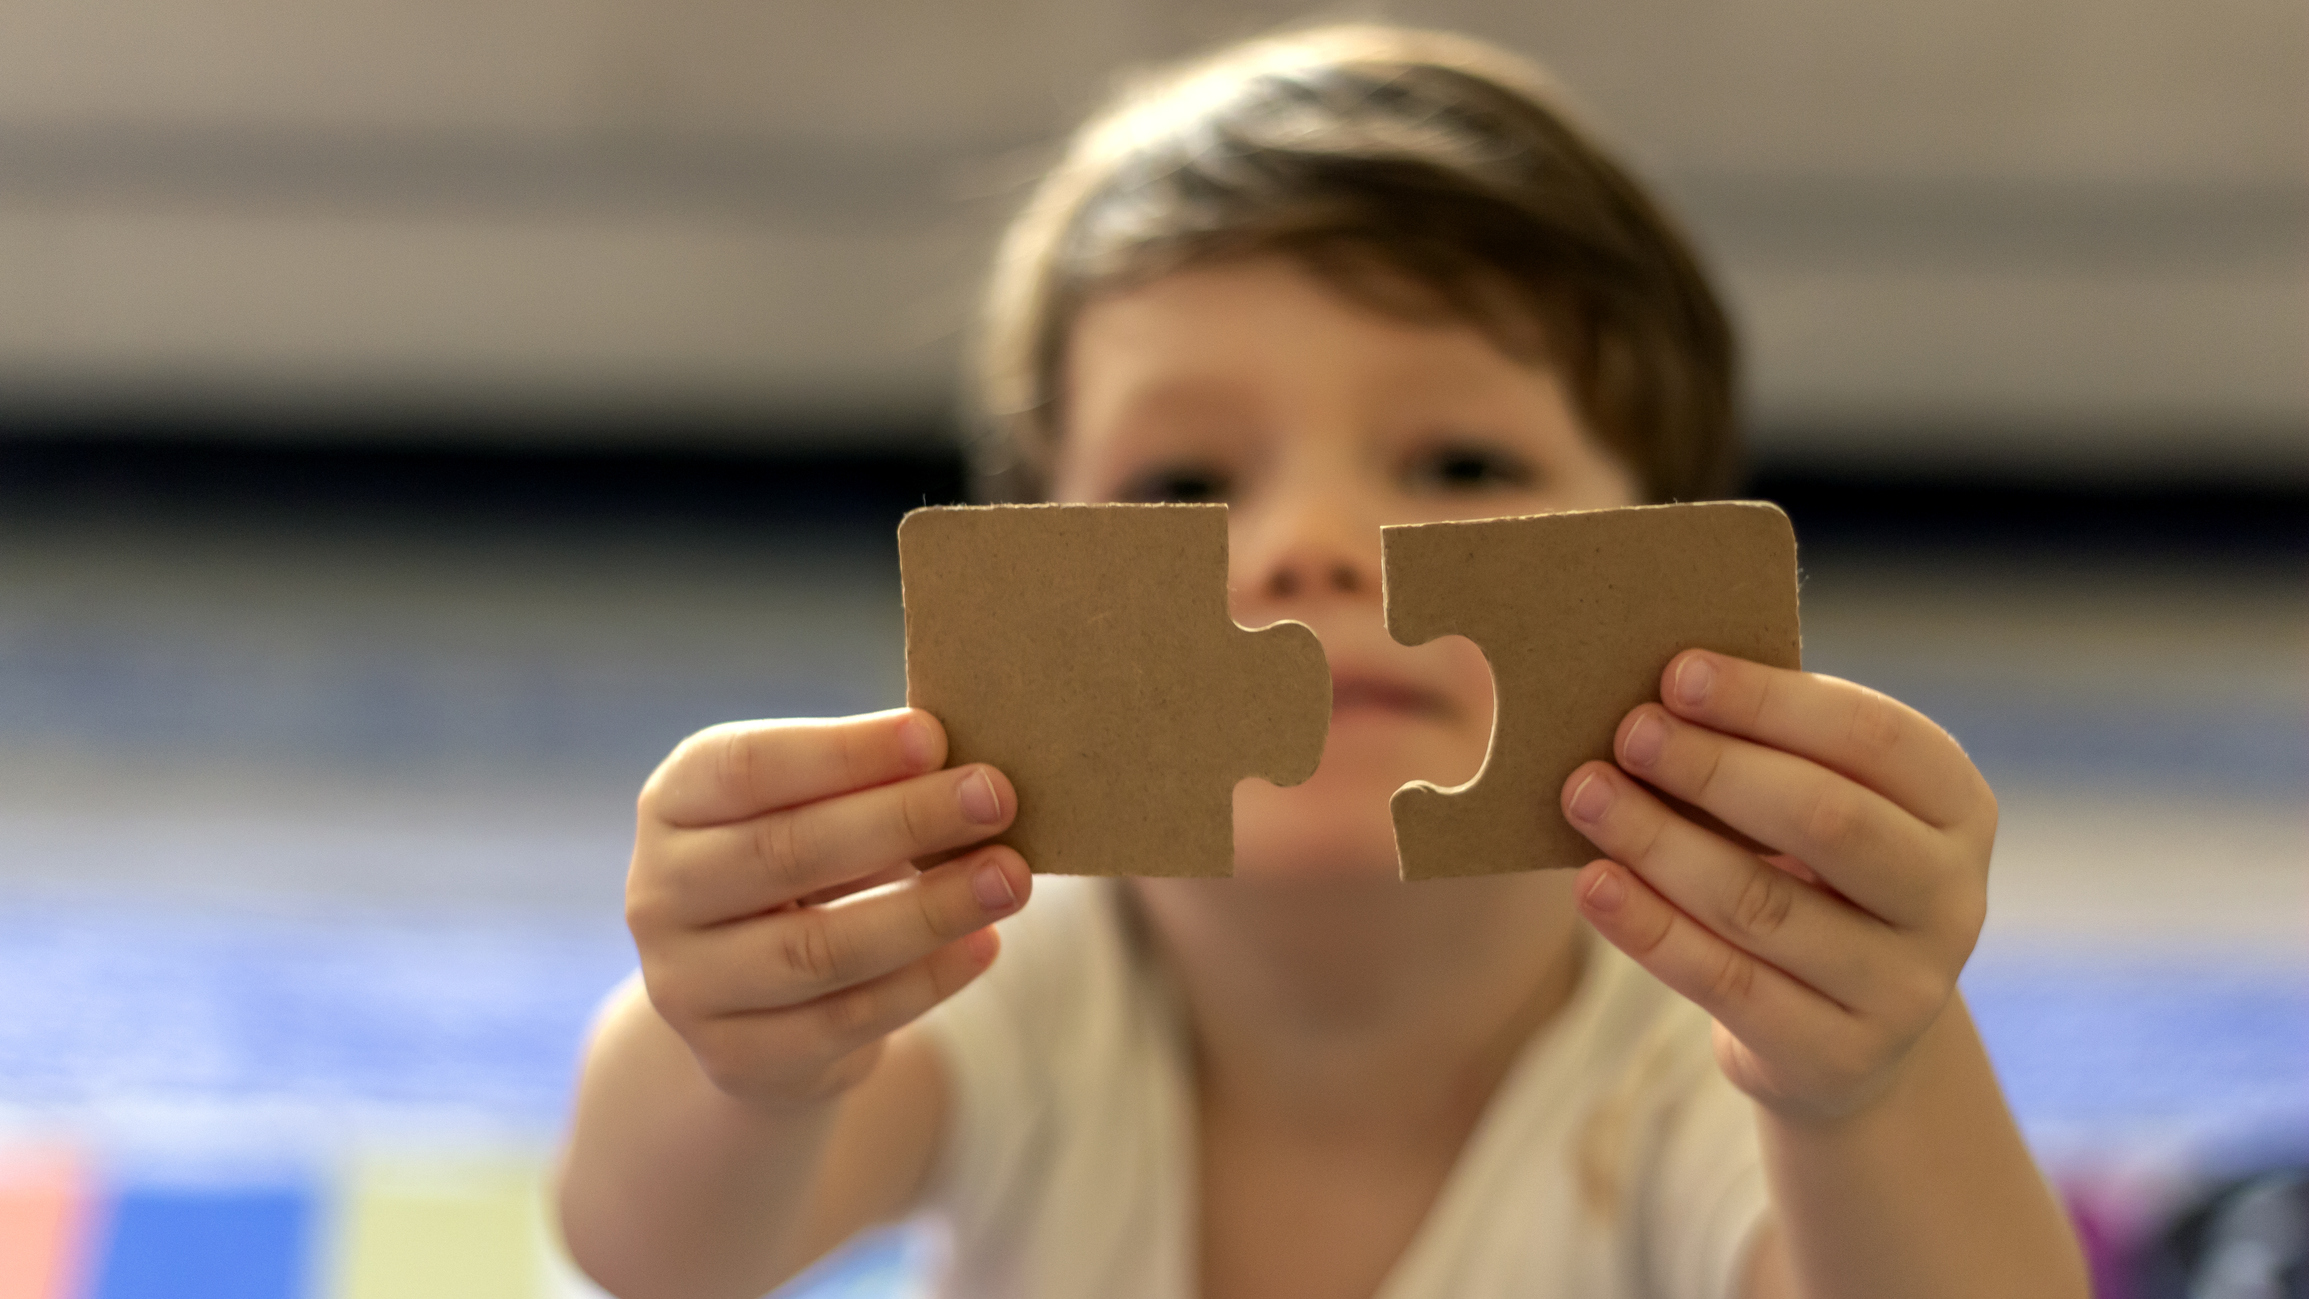 Boy holding up puzzle pieces